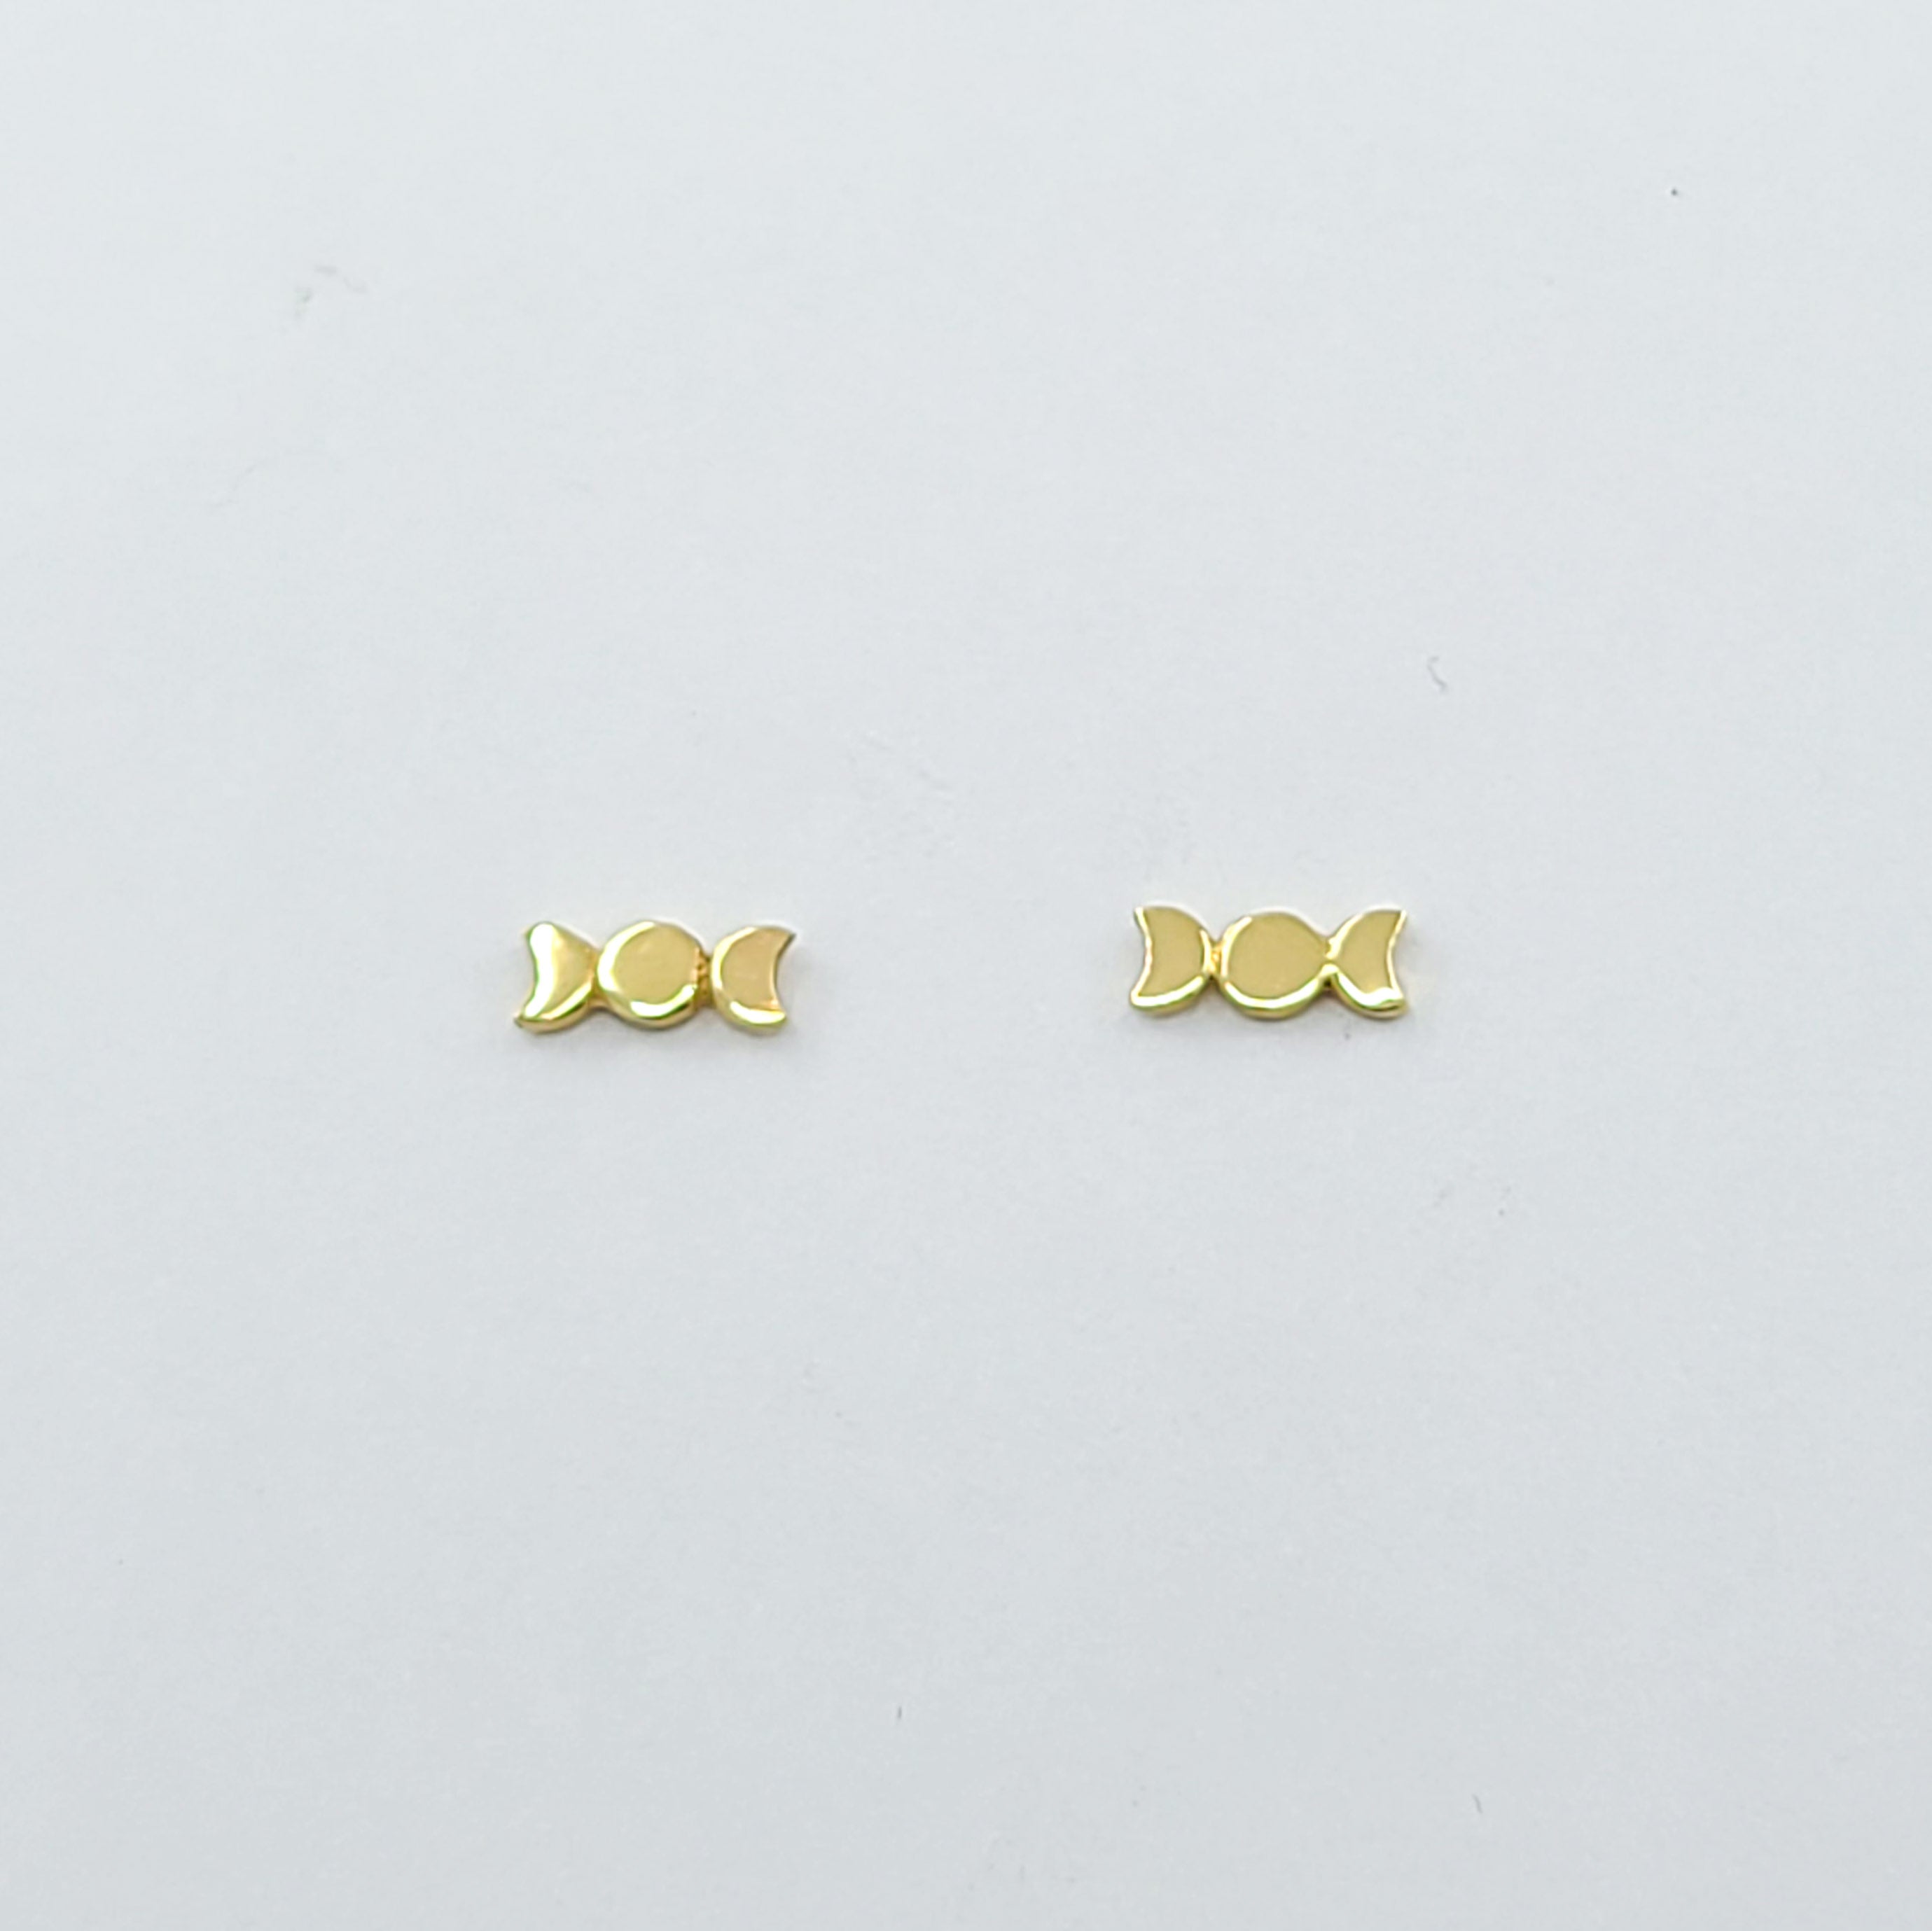 Small 10K - 14K Yellow Gold Moon Phase Earrings